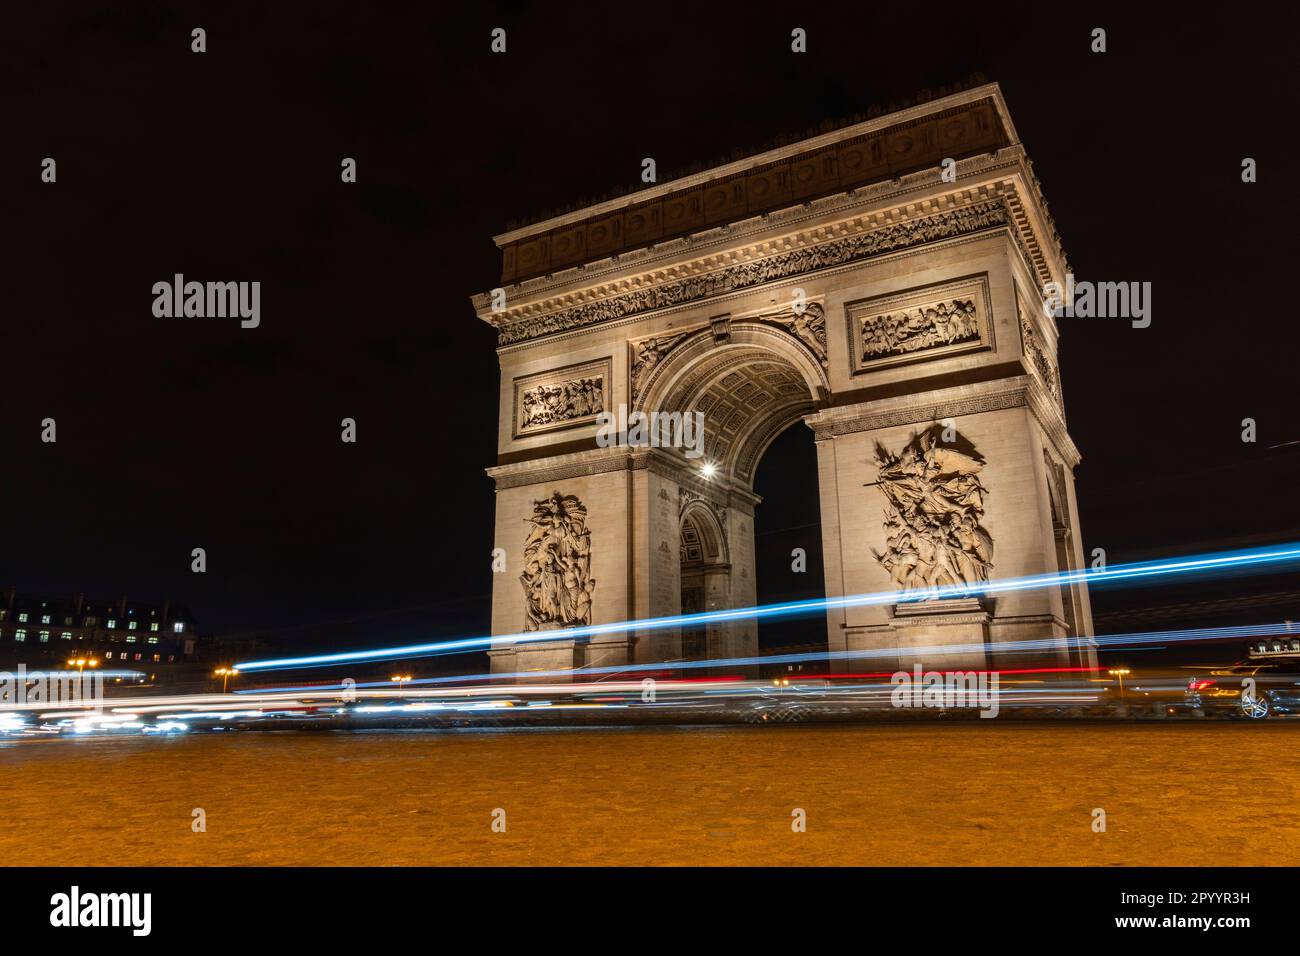 Arc de Triomphe's construction started in 1806 after Napoleon's victory at the Battle of the Three Emperors at Austerlitz. Stock Photo